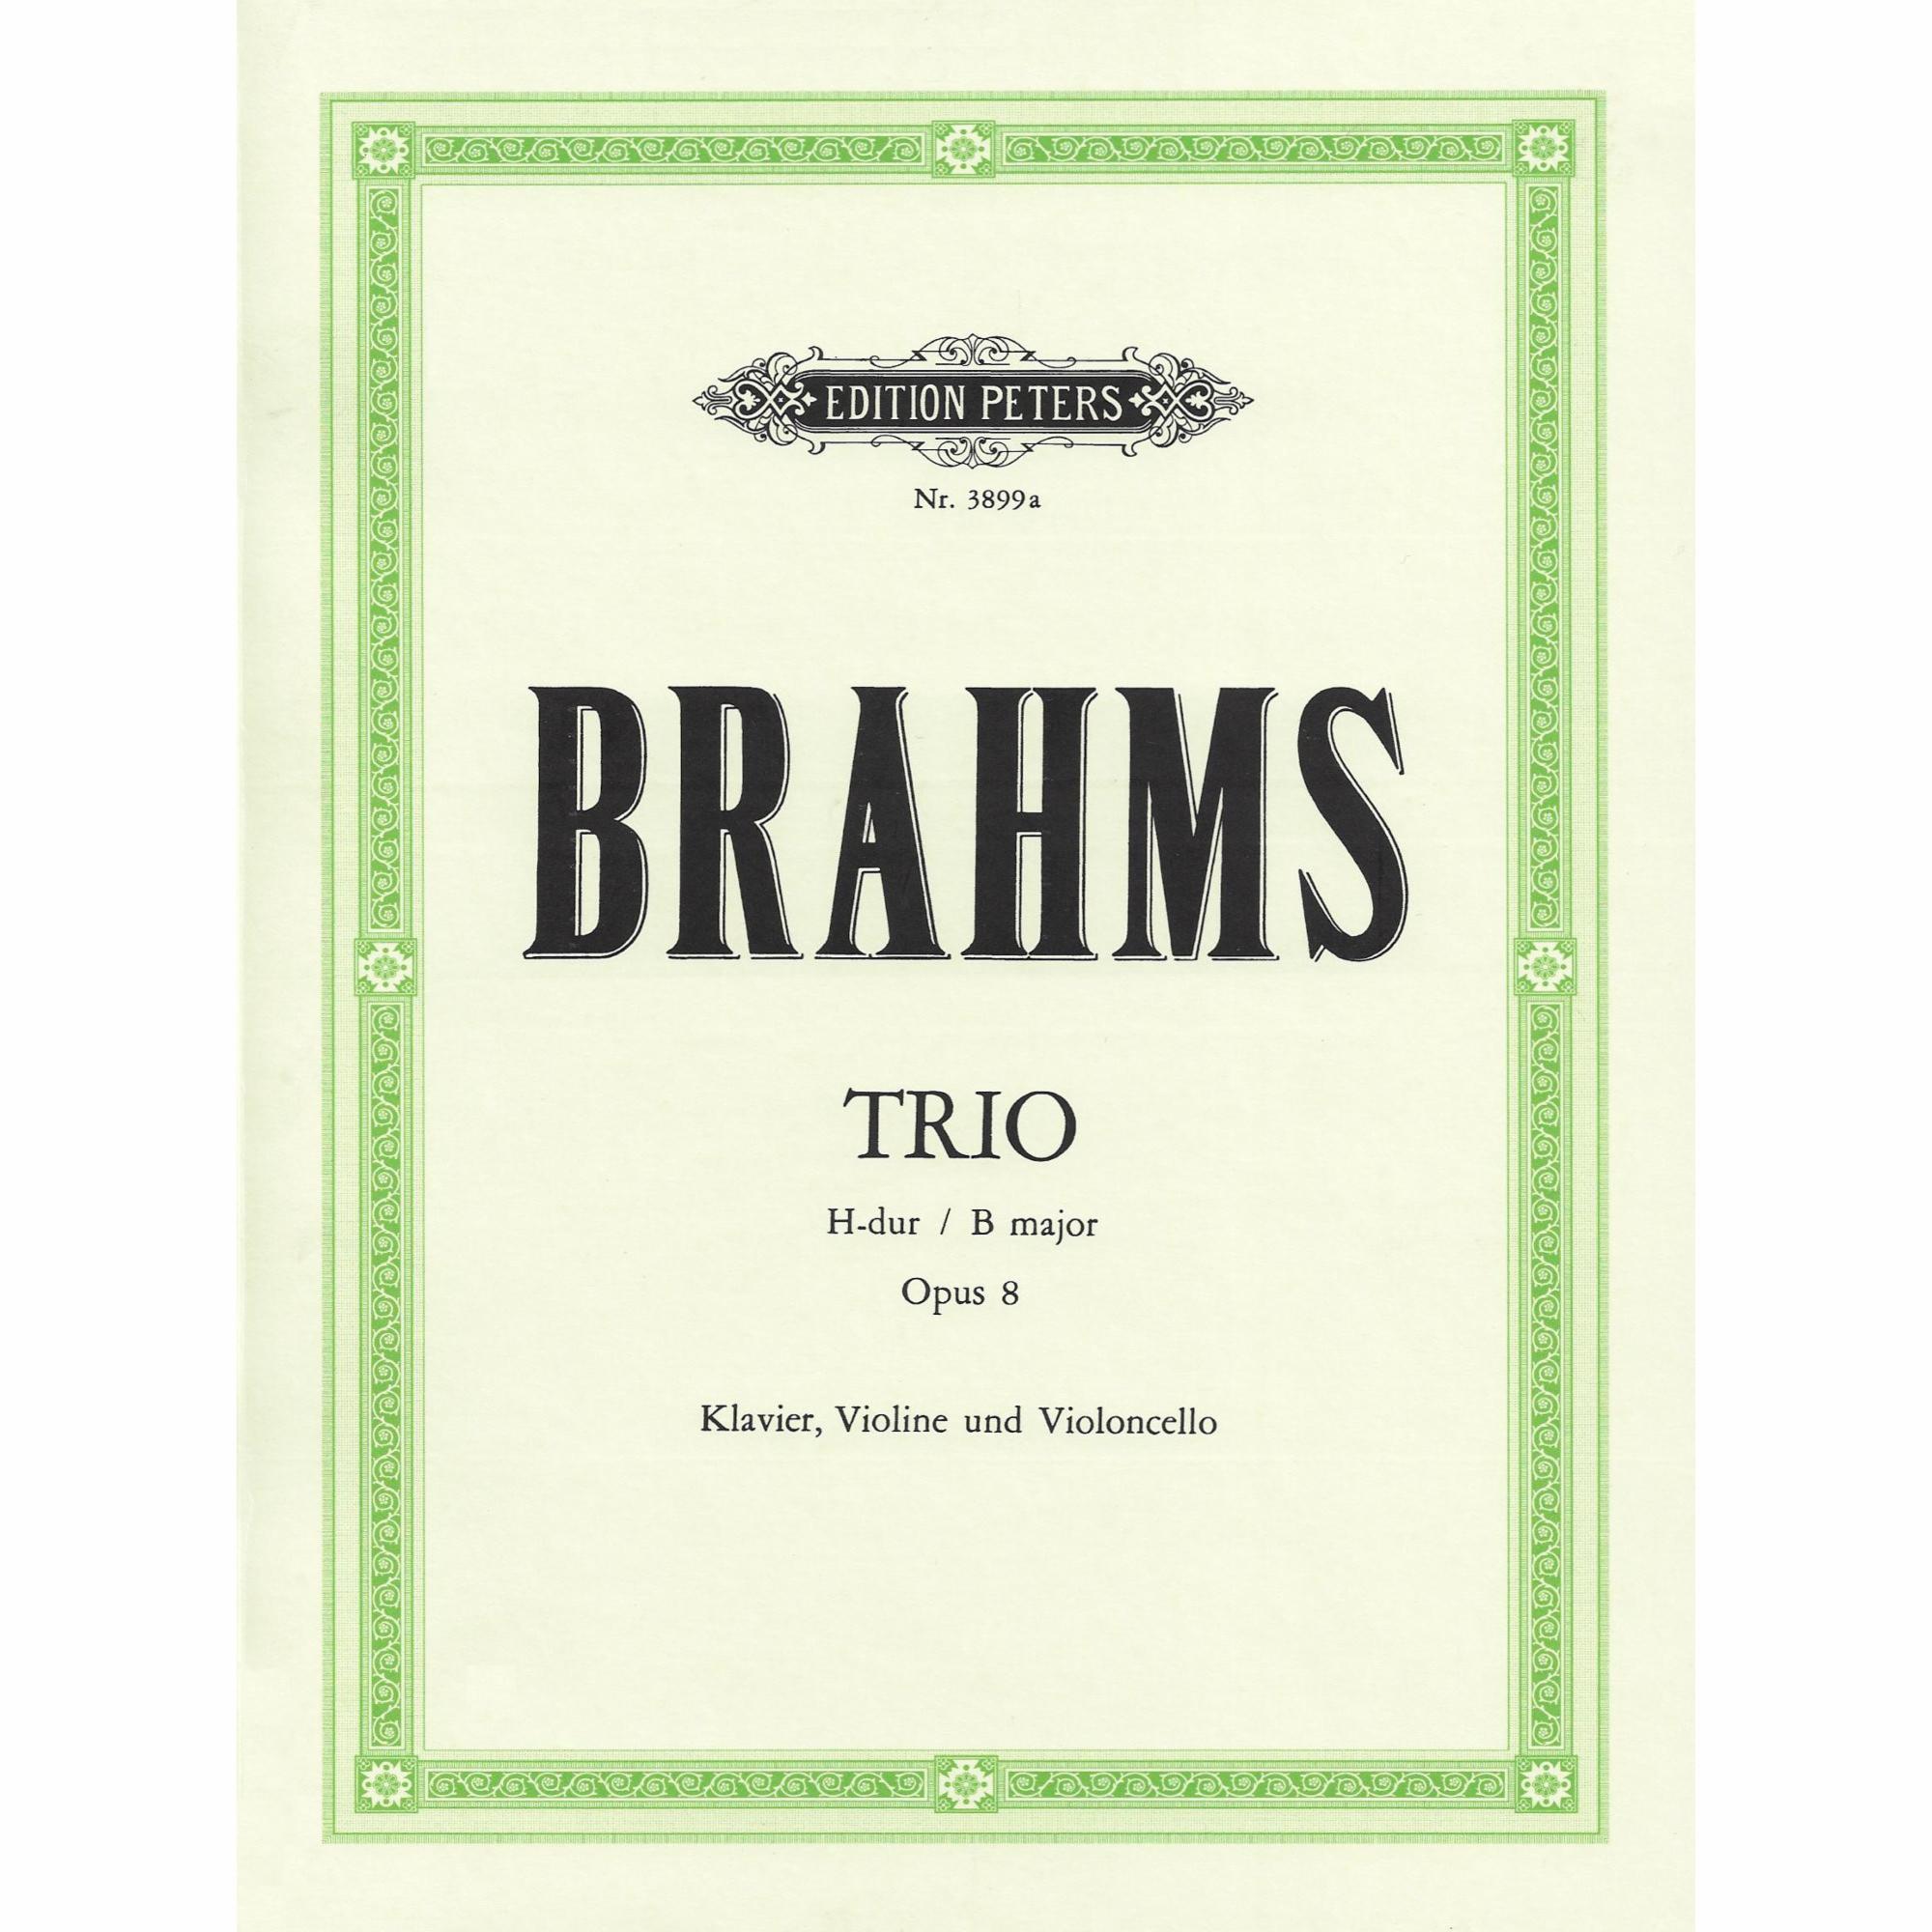 Brahms -- Trio in B Major, Op. 8 for Violin, Cello, and Piano